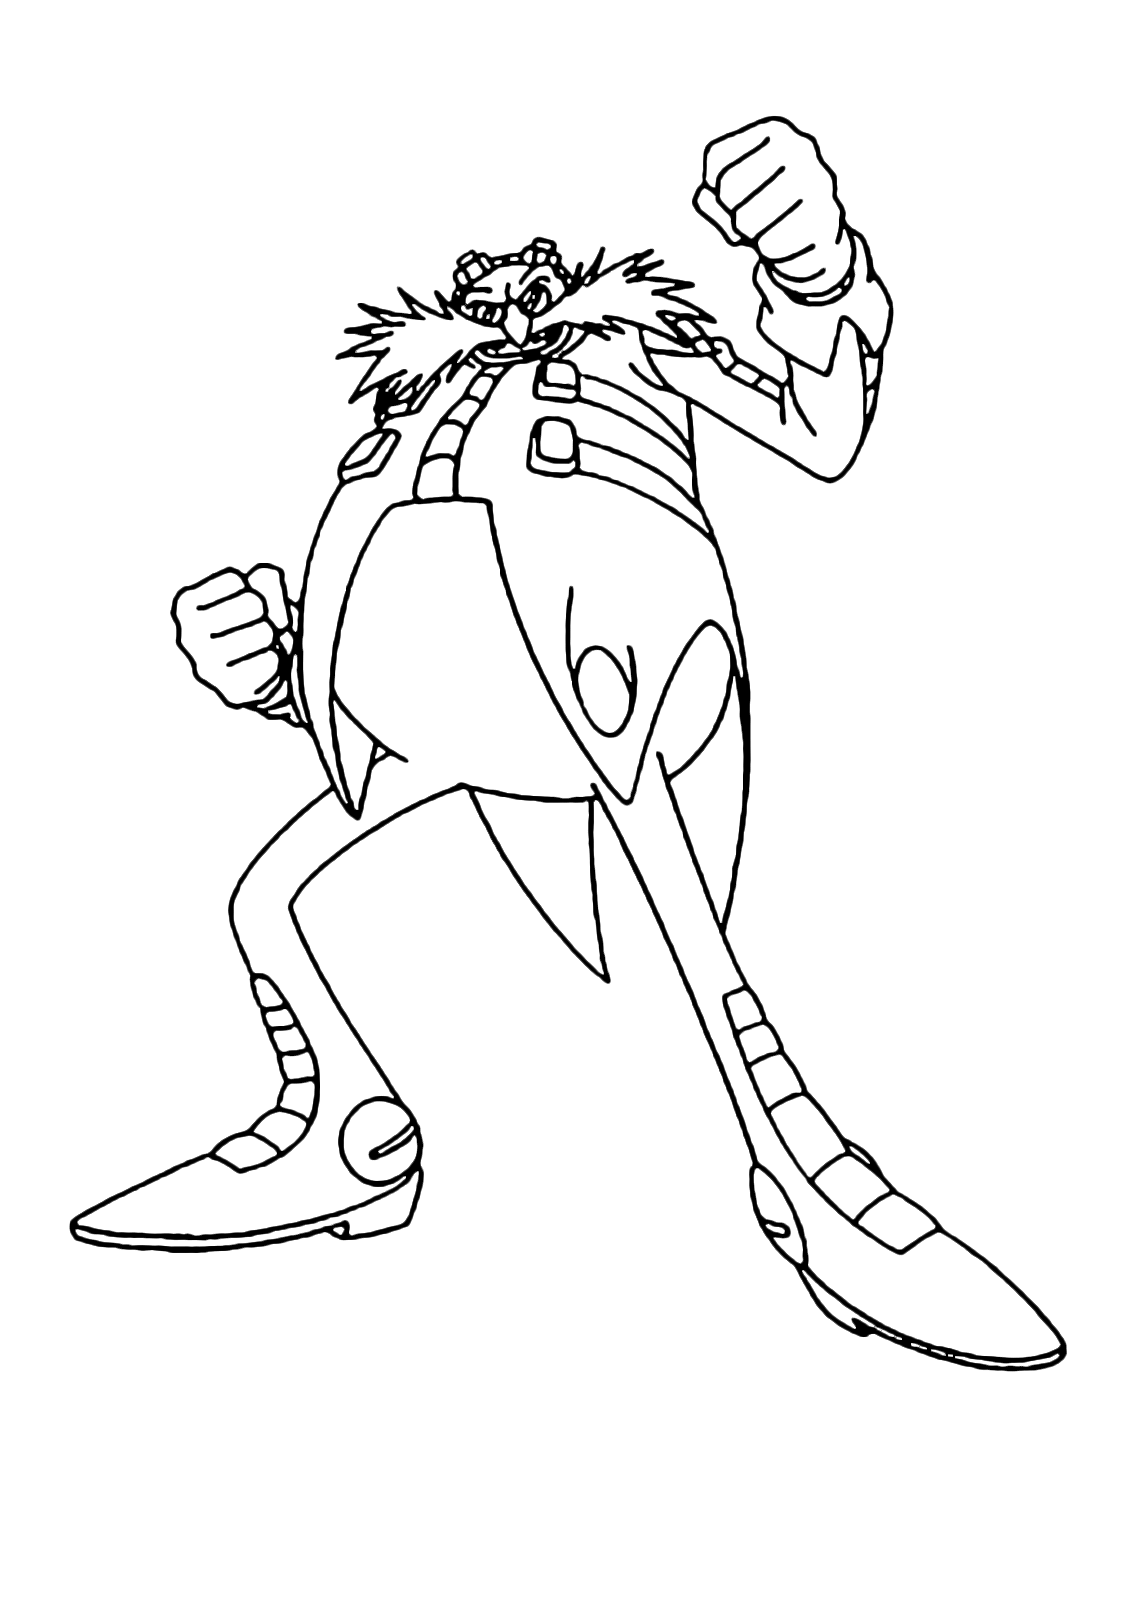 Strong Doctor Eggman Coloring Page